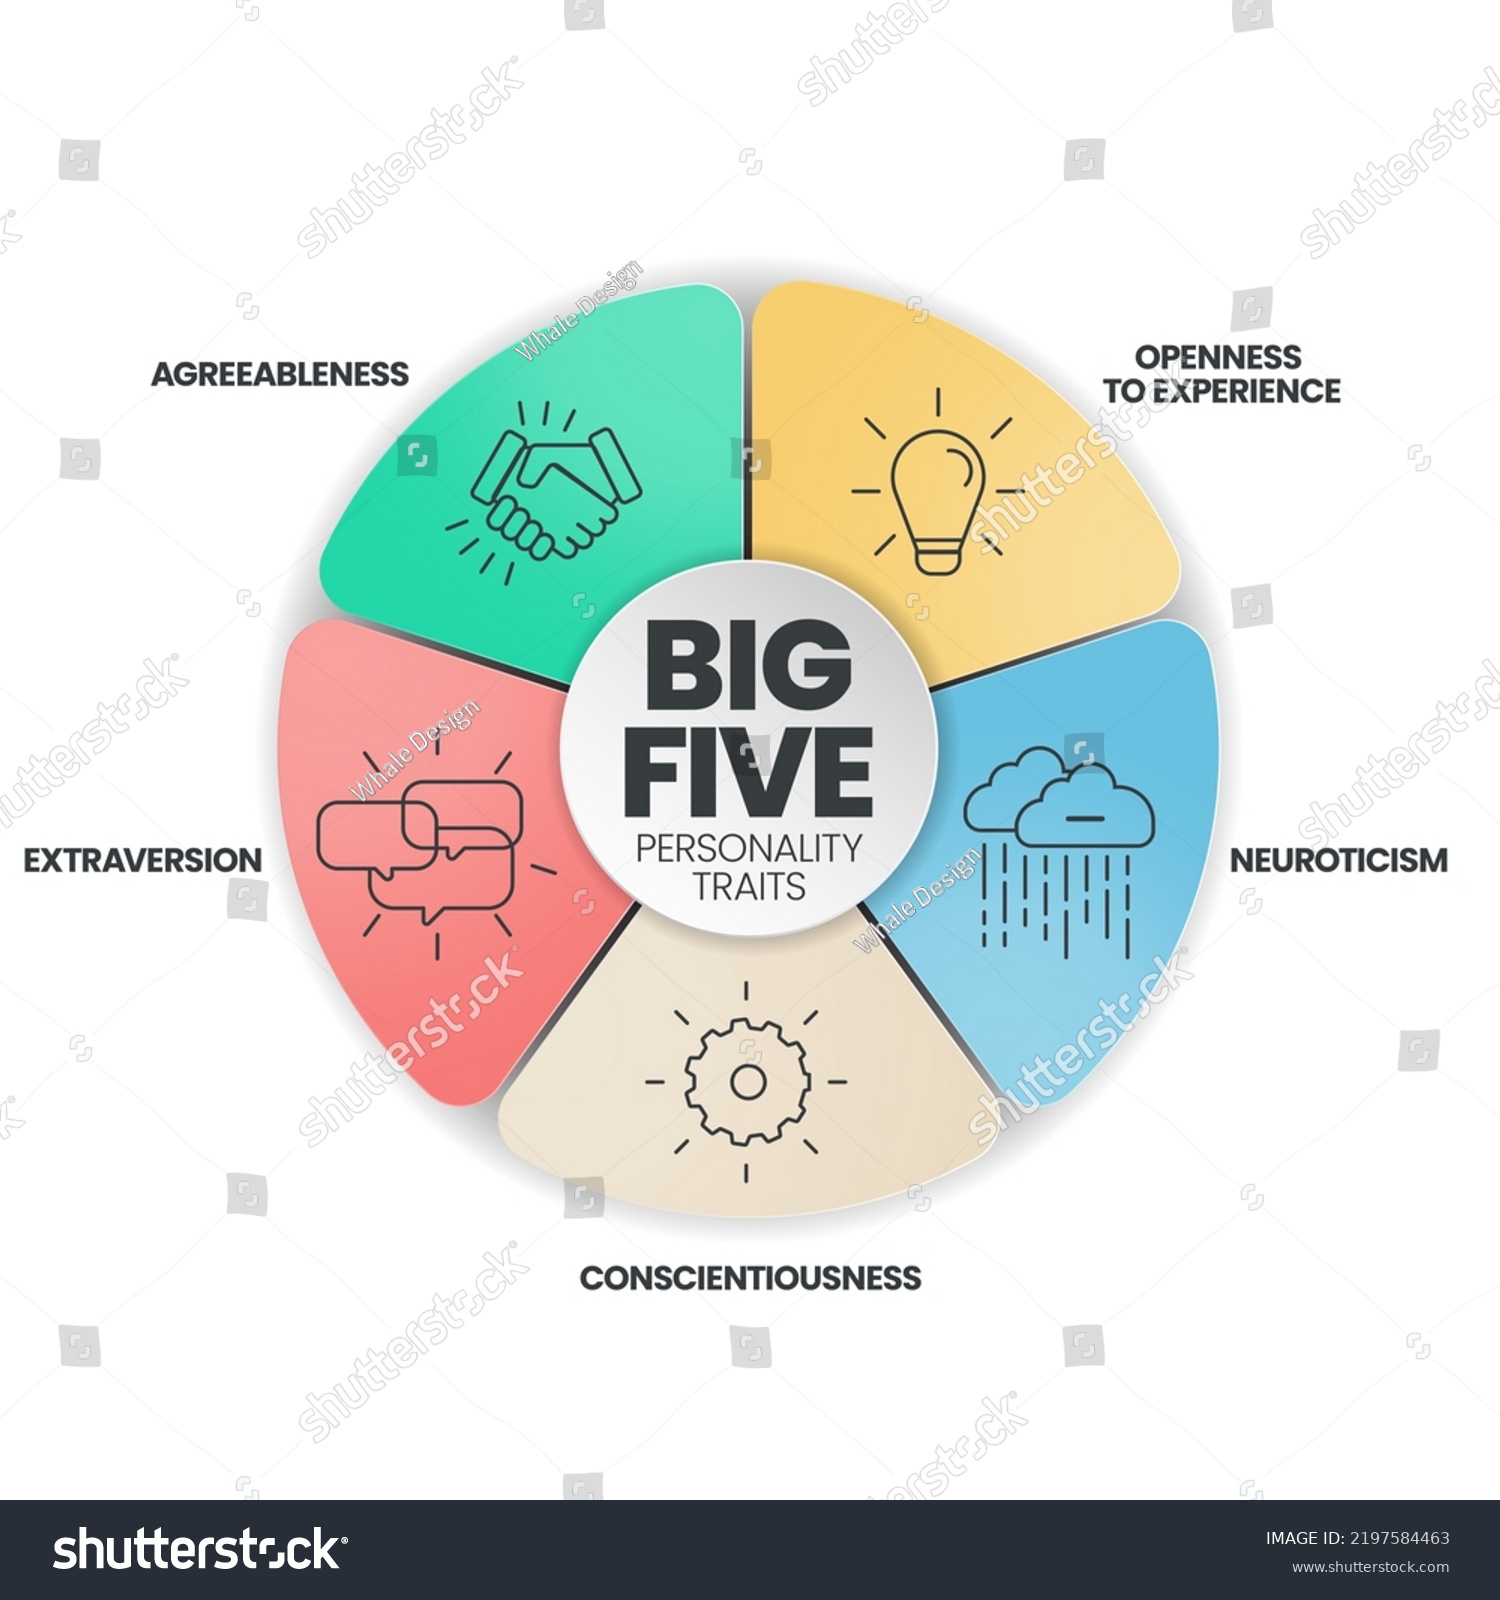 Big Five Personality Traits Infographic Has Stock Vector (Royalty Free ...